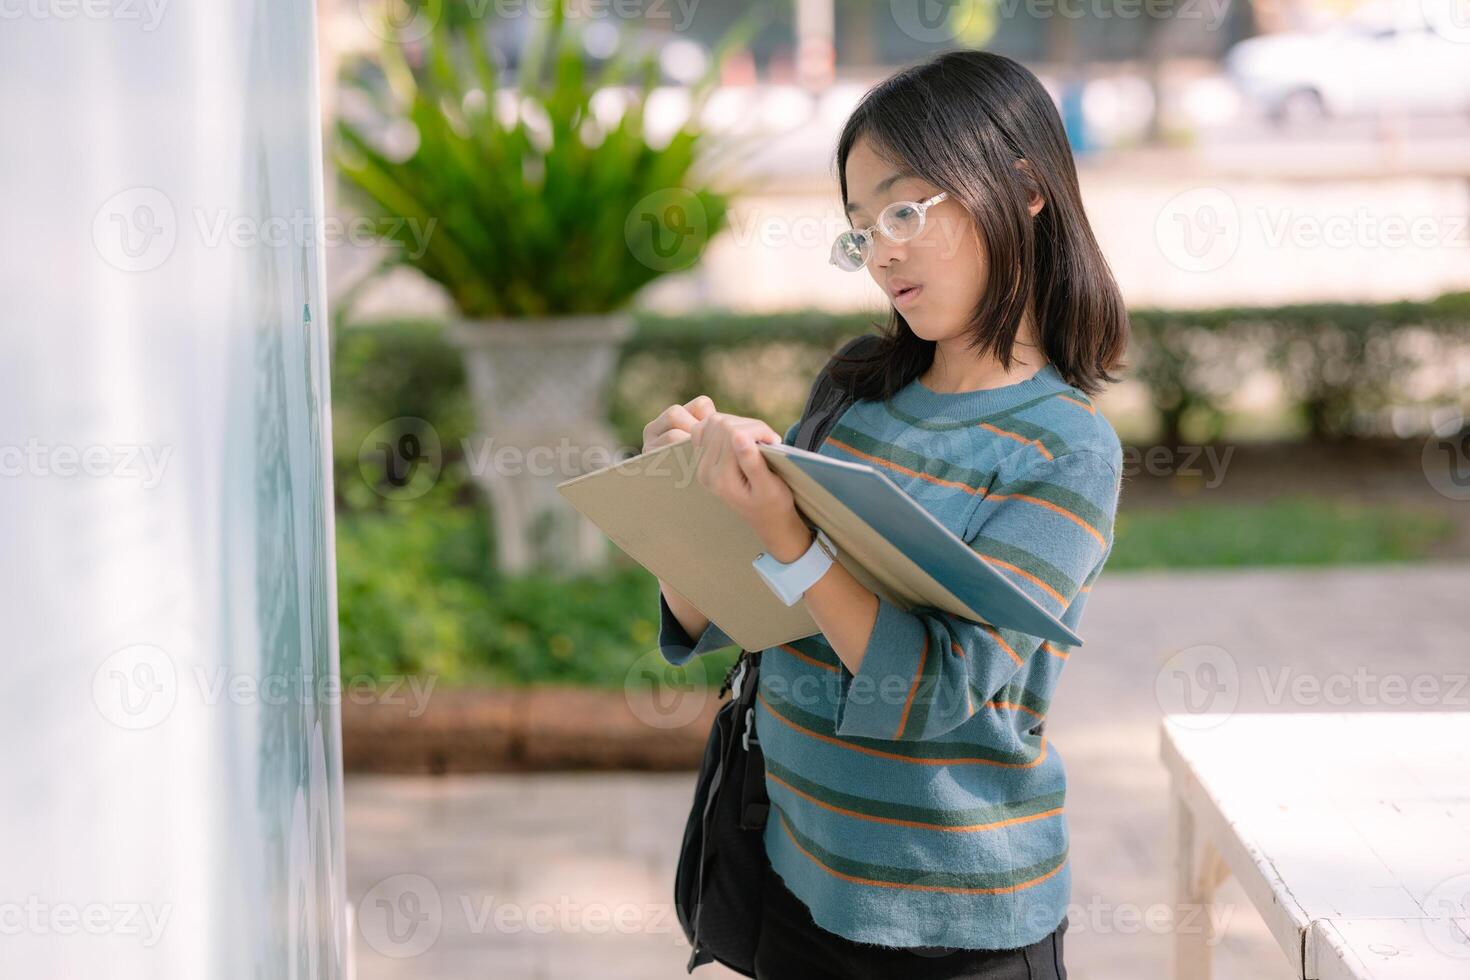 A girl wearing glasses is looking at a white board photo